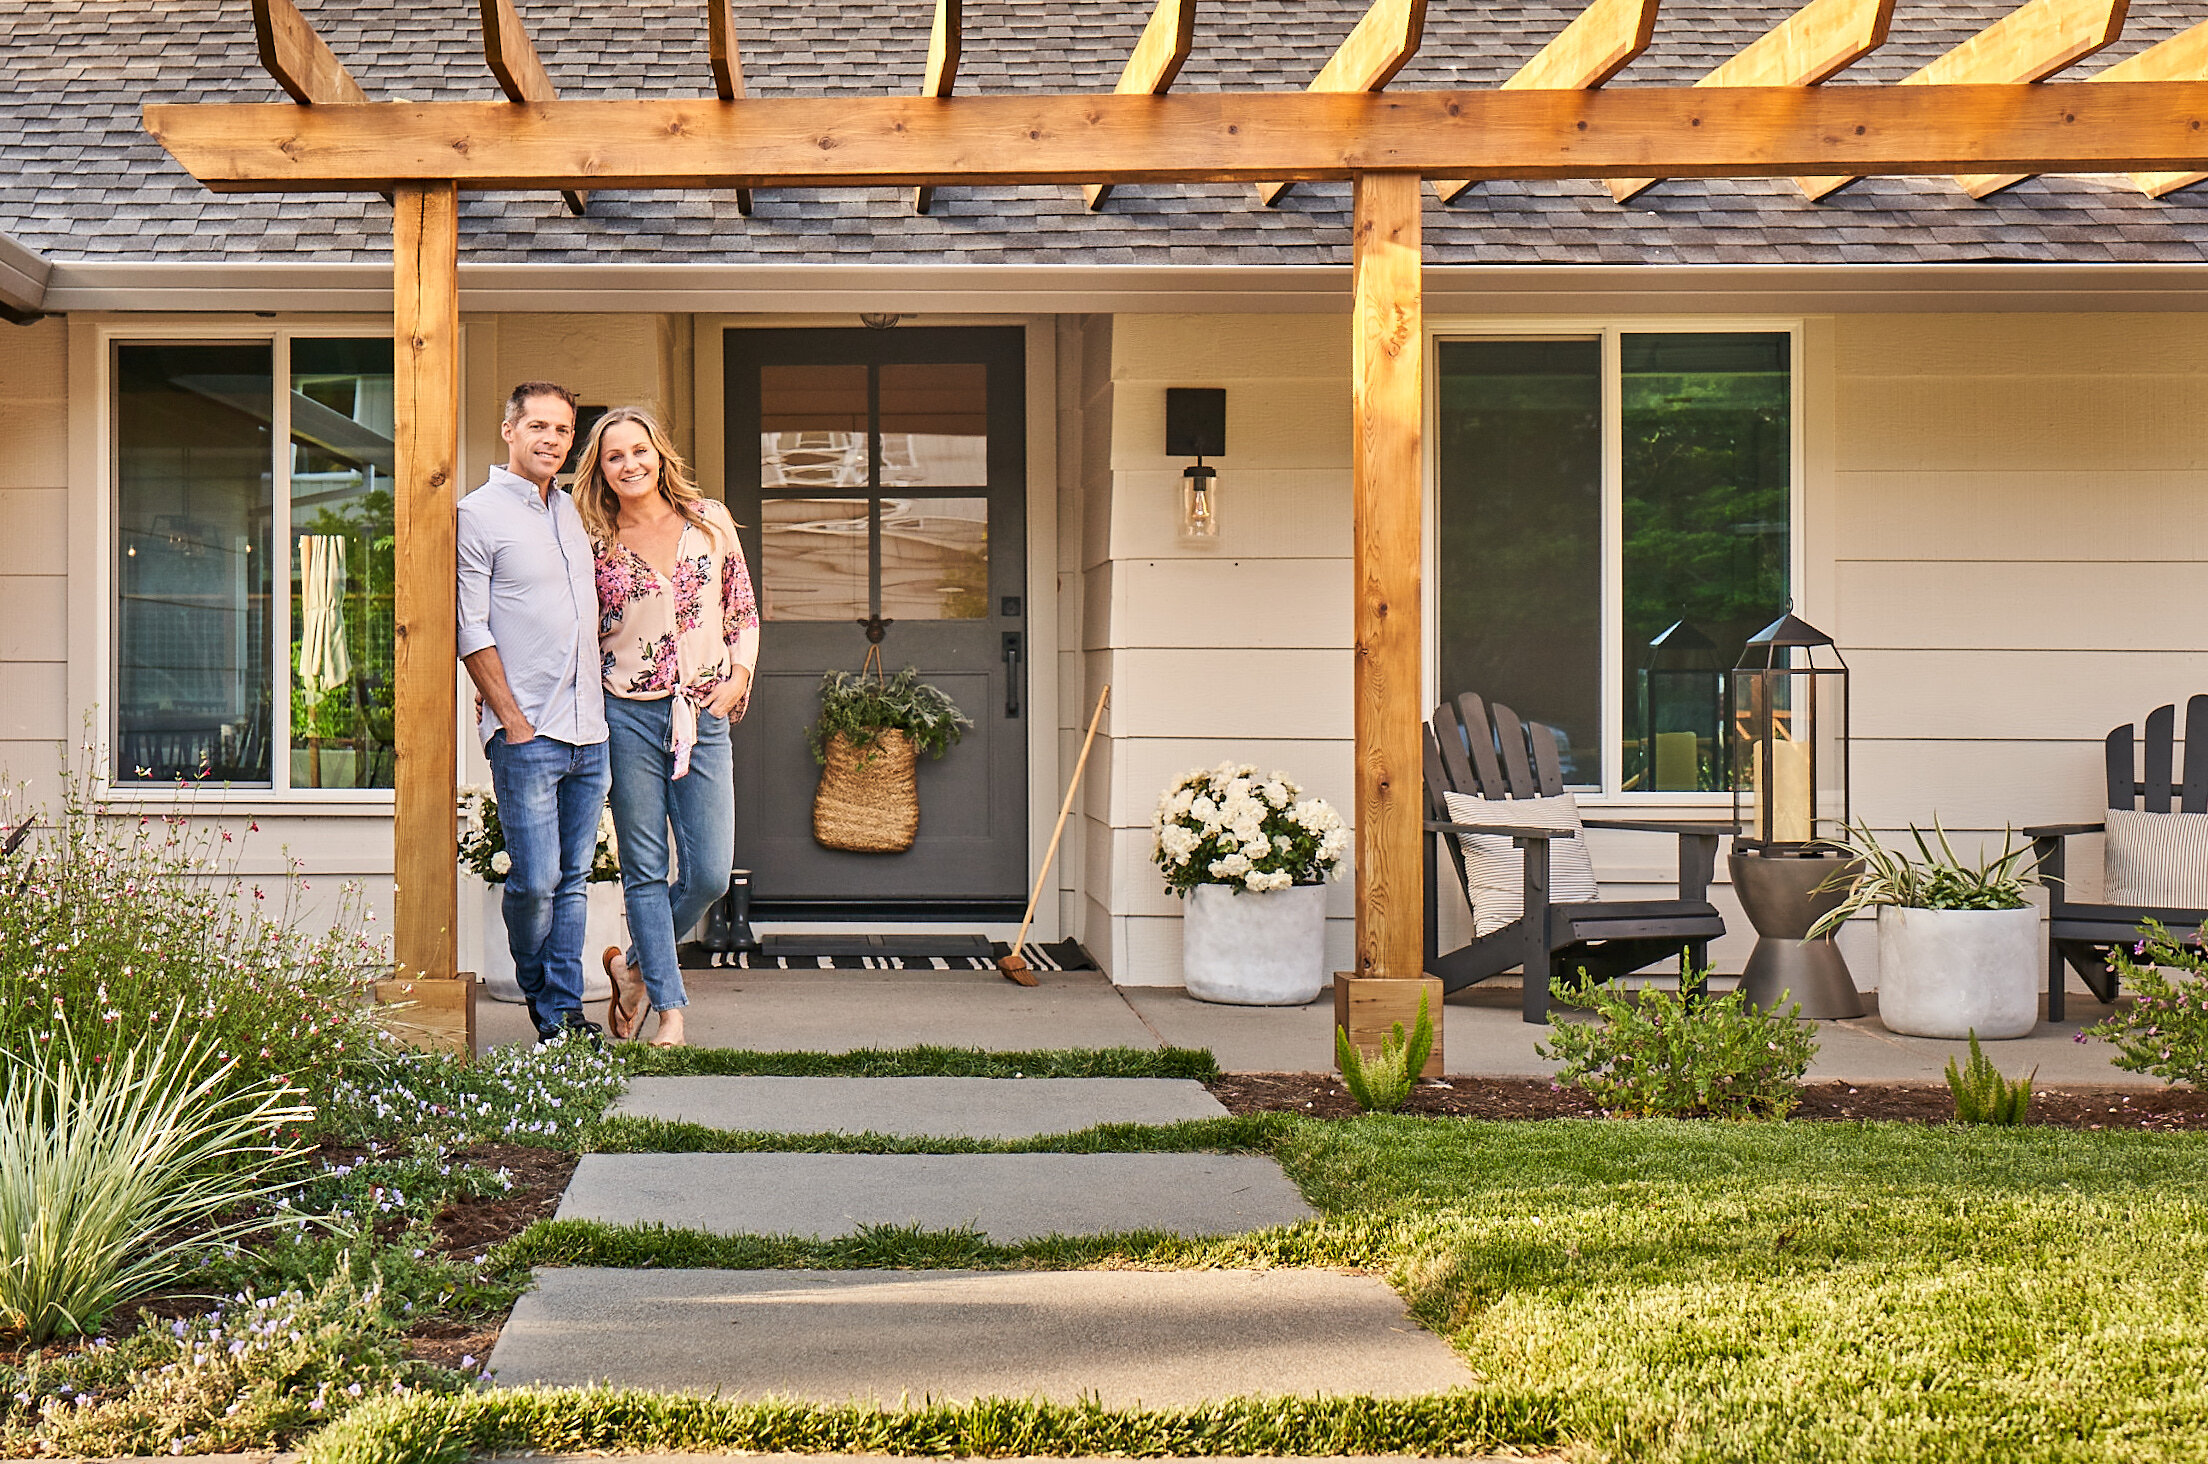 Yardzen’s first exterior design clients knew that the only way to transform their front yard was to change their home’s exterior, too.